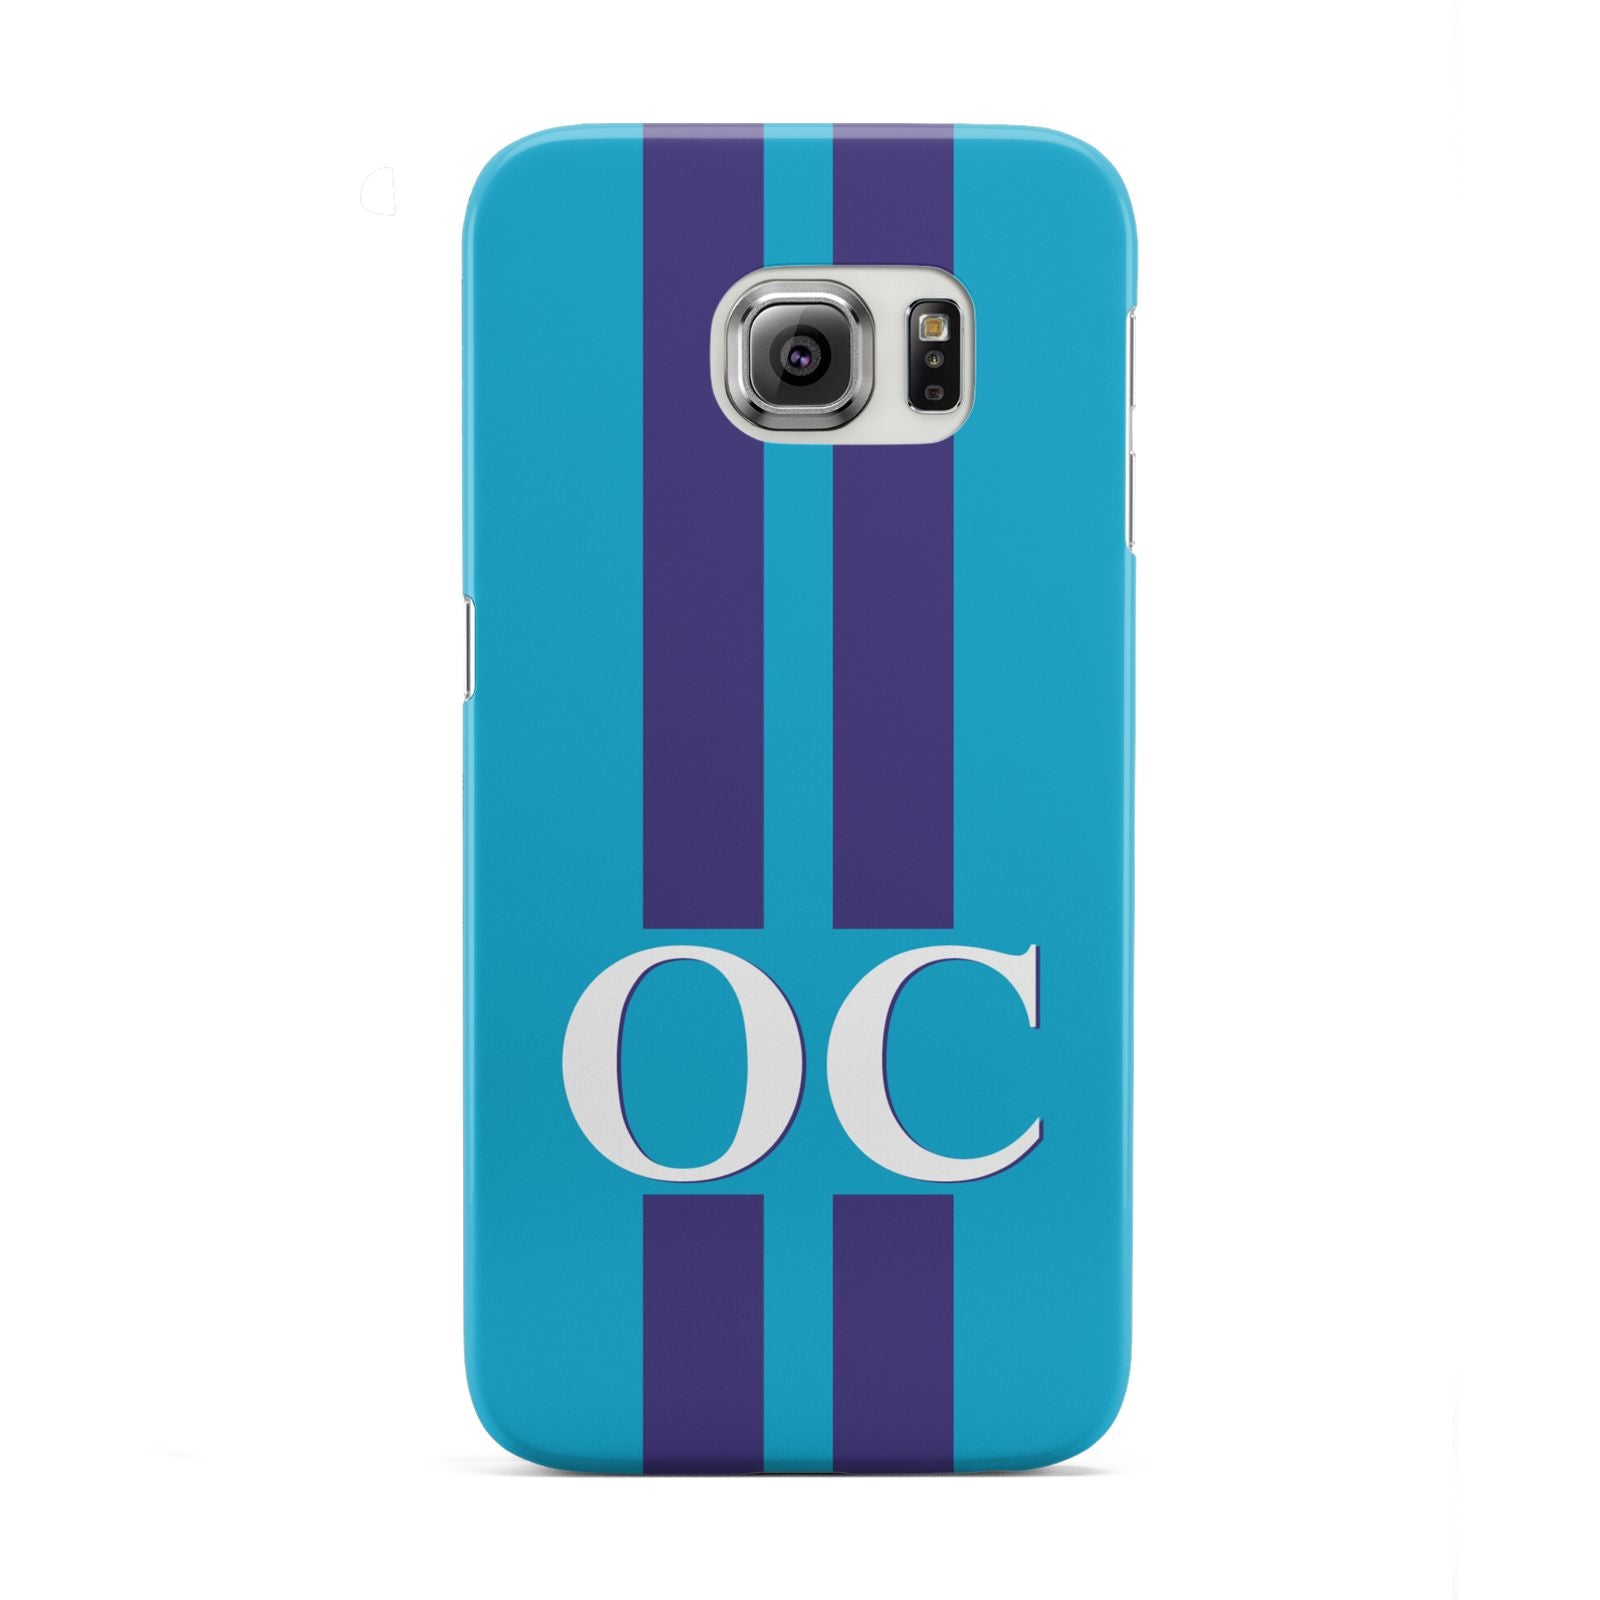 Turquoise Personalised Samsung Galaxy S6 Edge Case